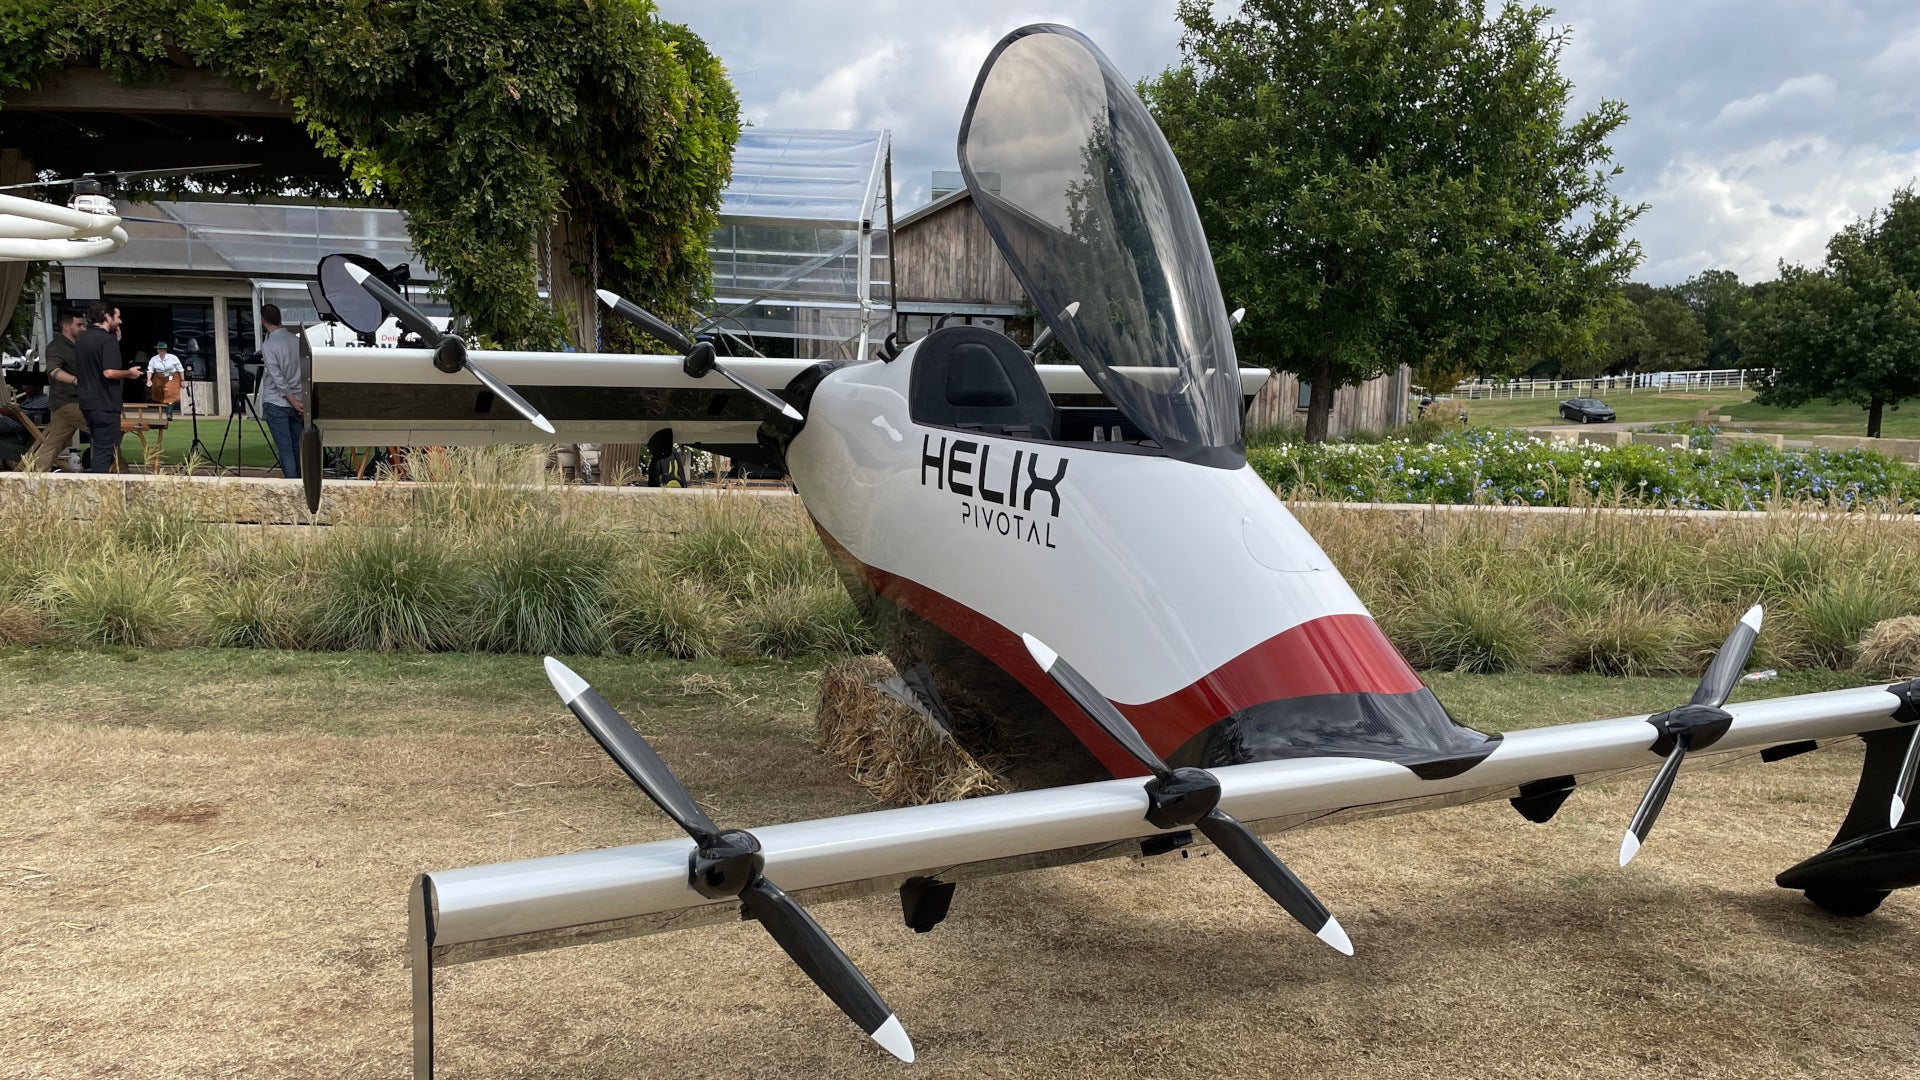 Opener Rebrands to Pivotal and Unveils Helix, Its First Scalable Production Aircraft